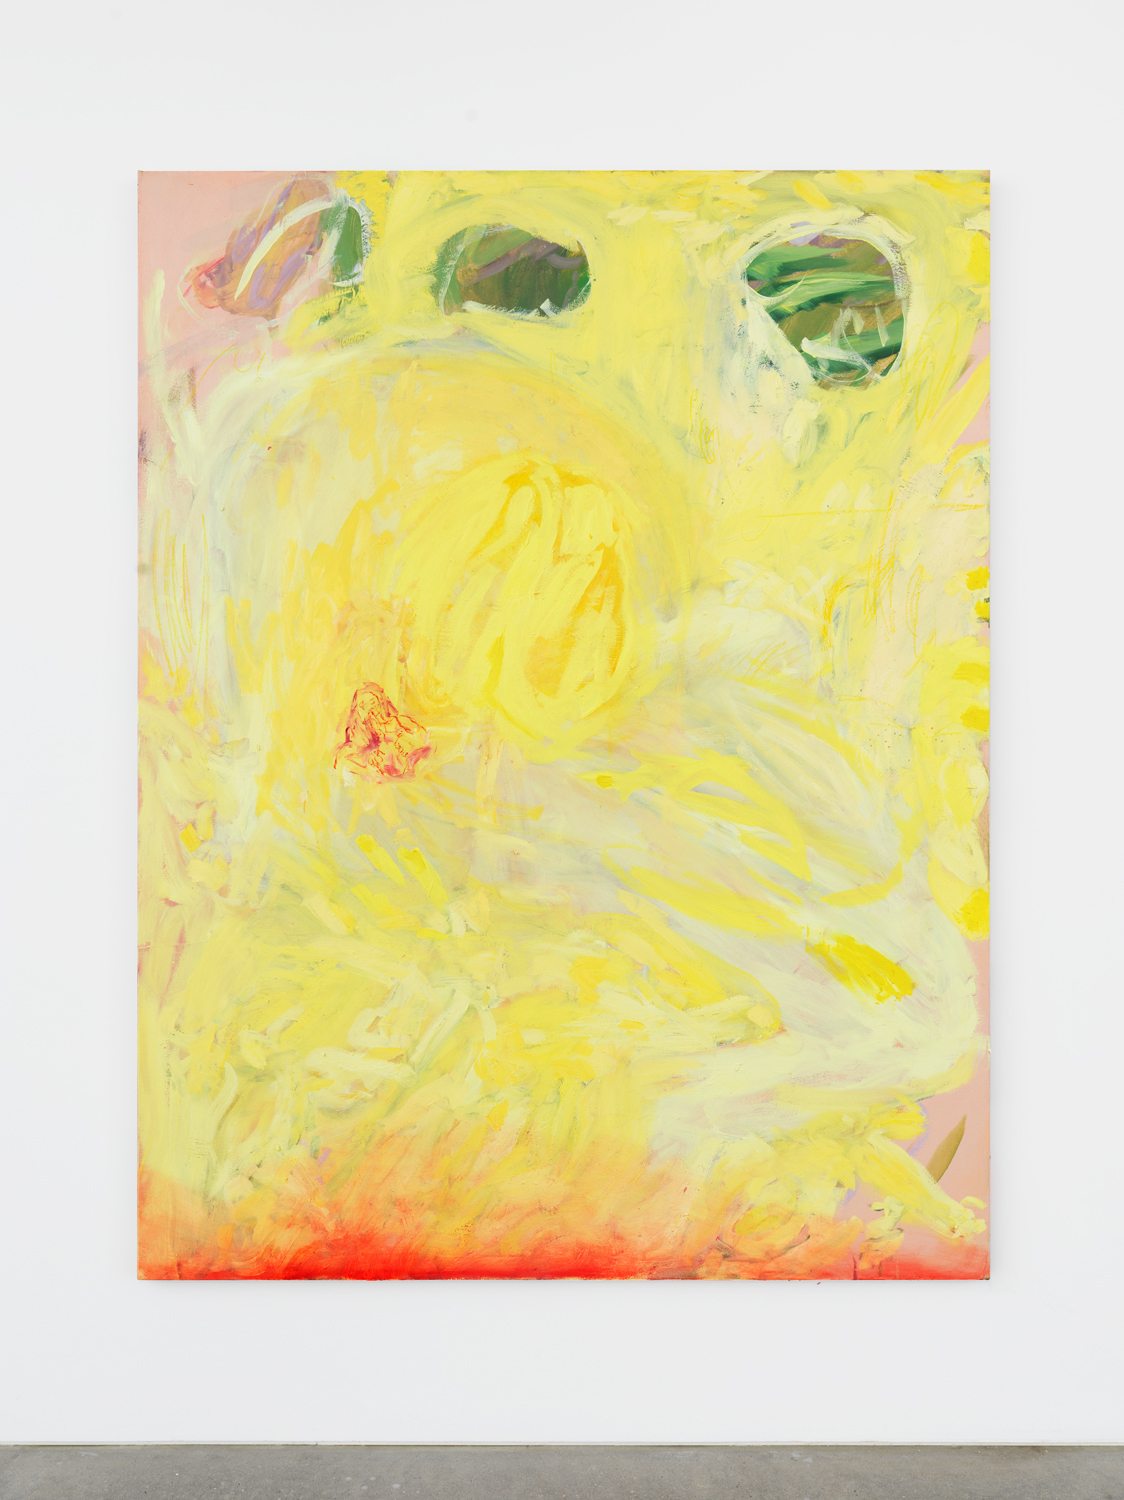 Rachel Rossin, Swollen Tulip, Goya Touch, 2021, Oil and oil stick on canvas, 78.25h x 60w in.